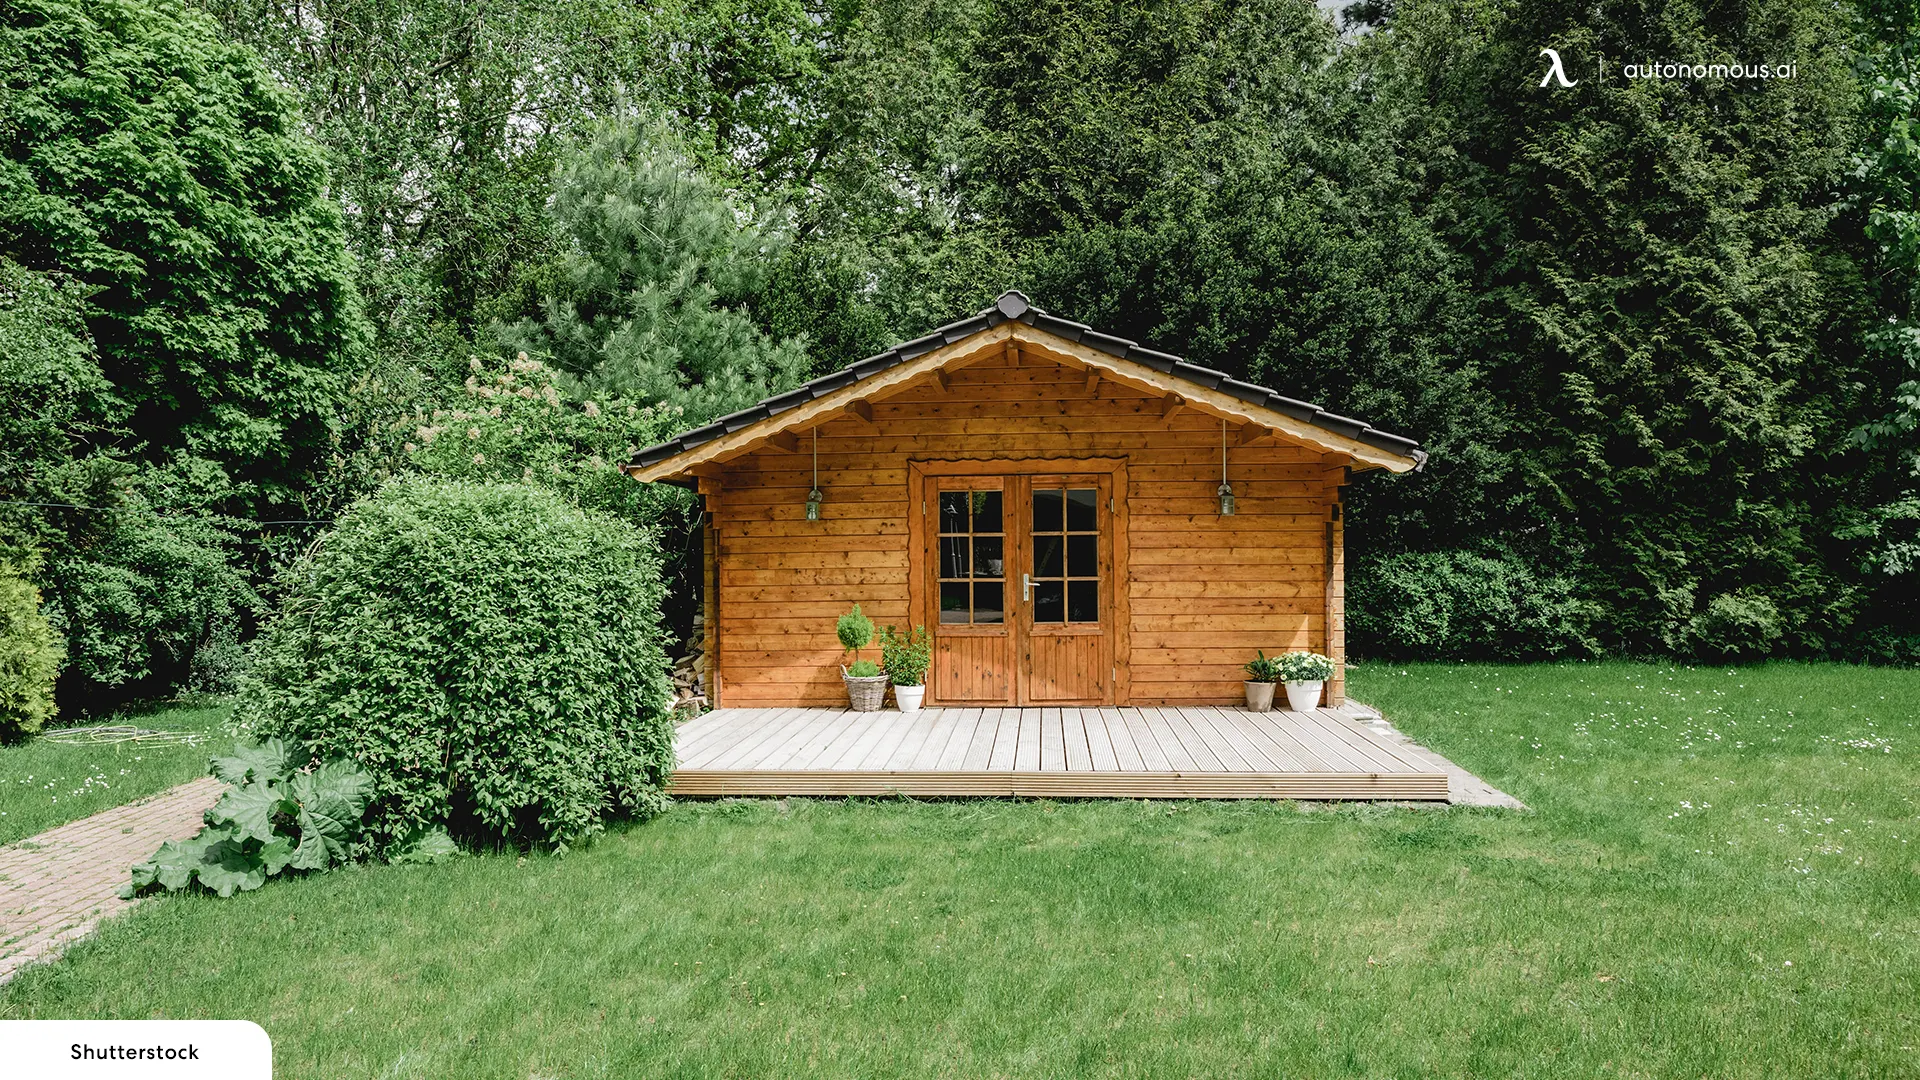 Should You Buy a Tiny Home or Build One?